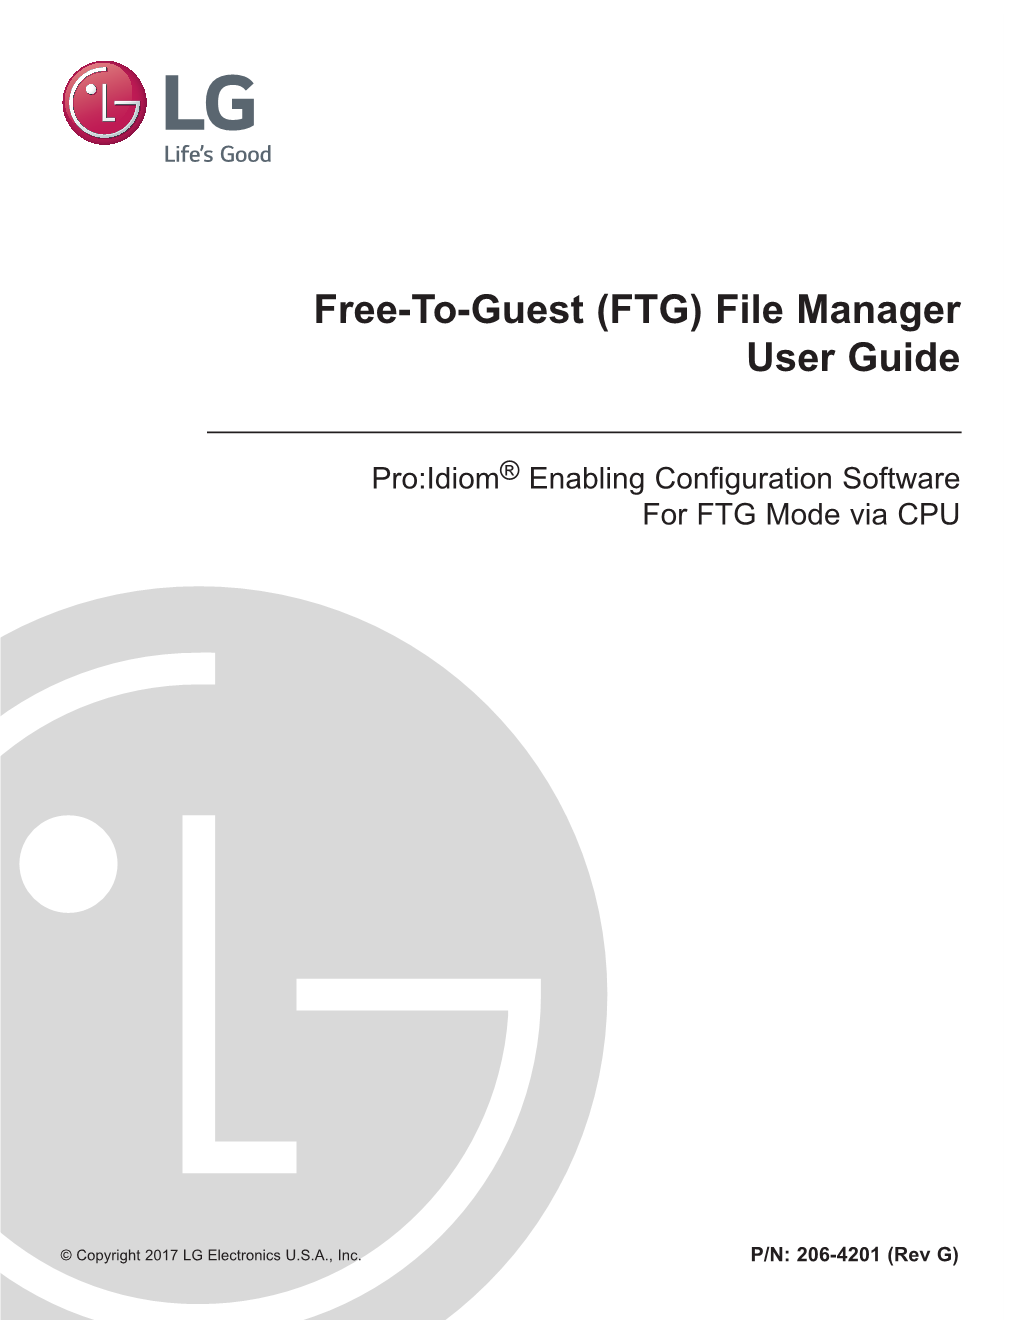 Free-To-Guest (FTG) File Manager User Guide